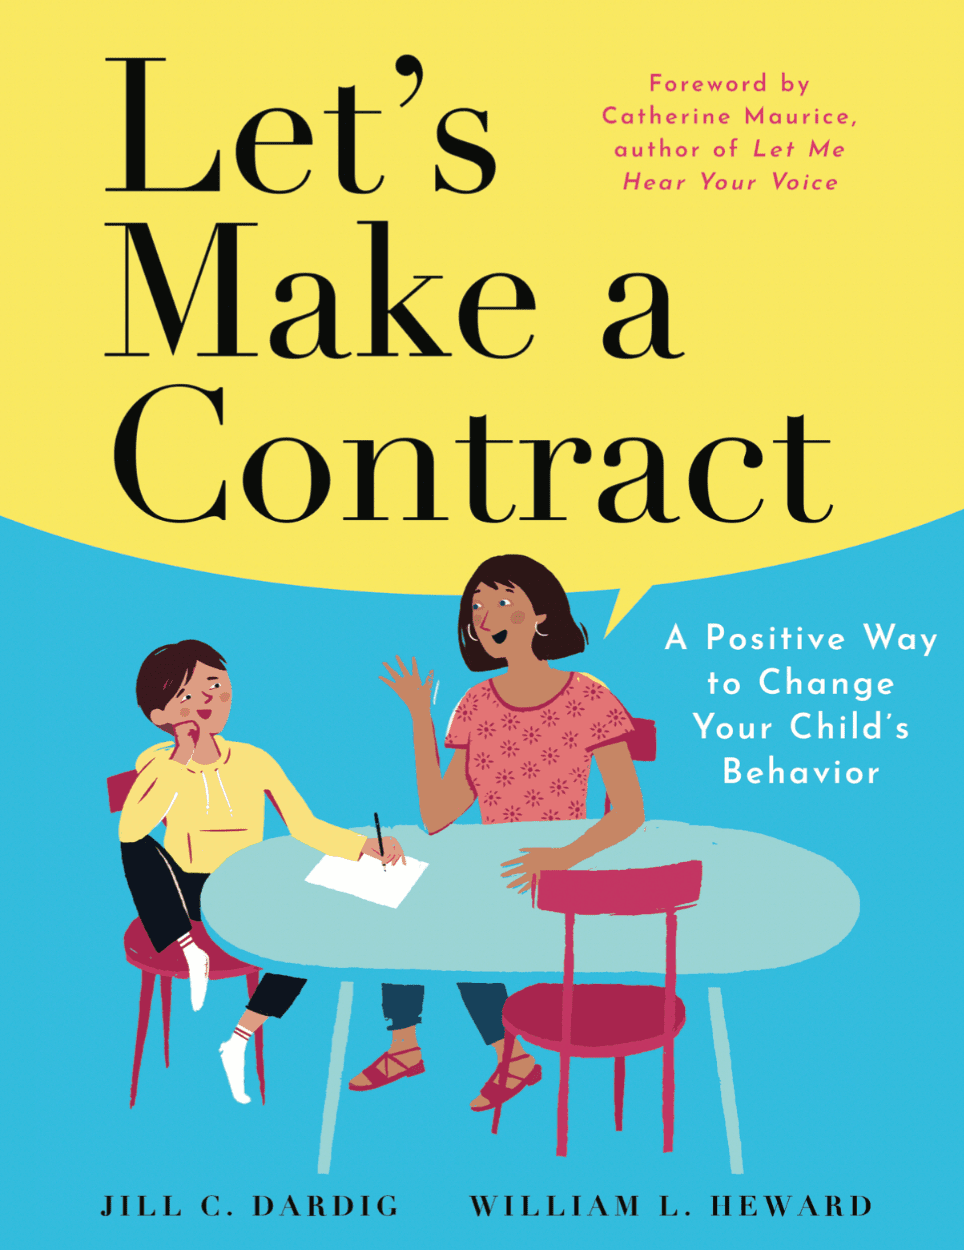 Autism book review lets make a contract